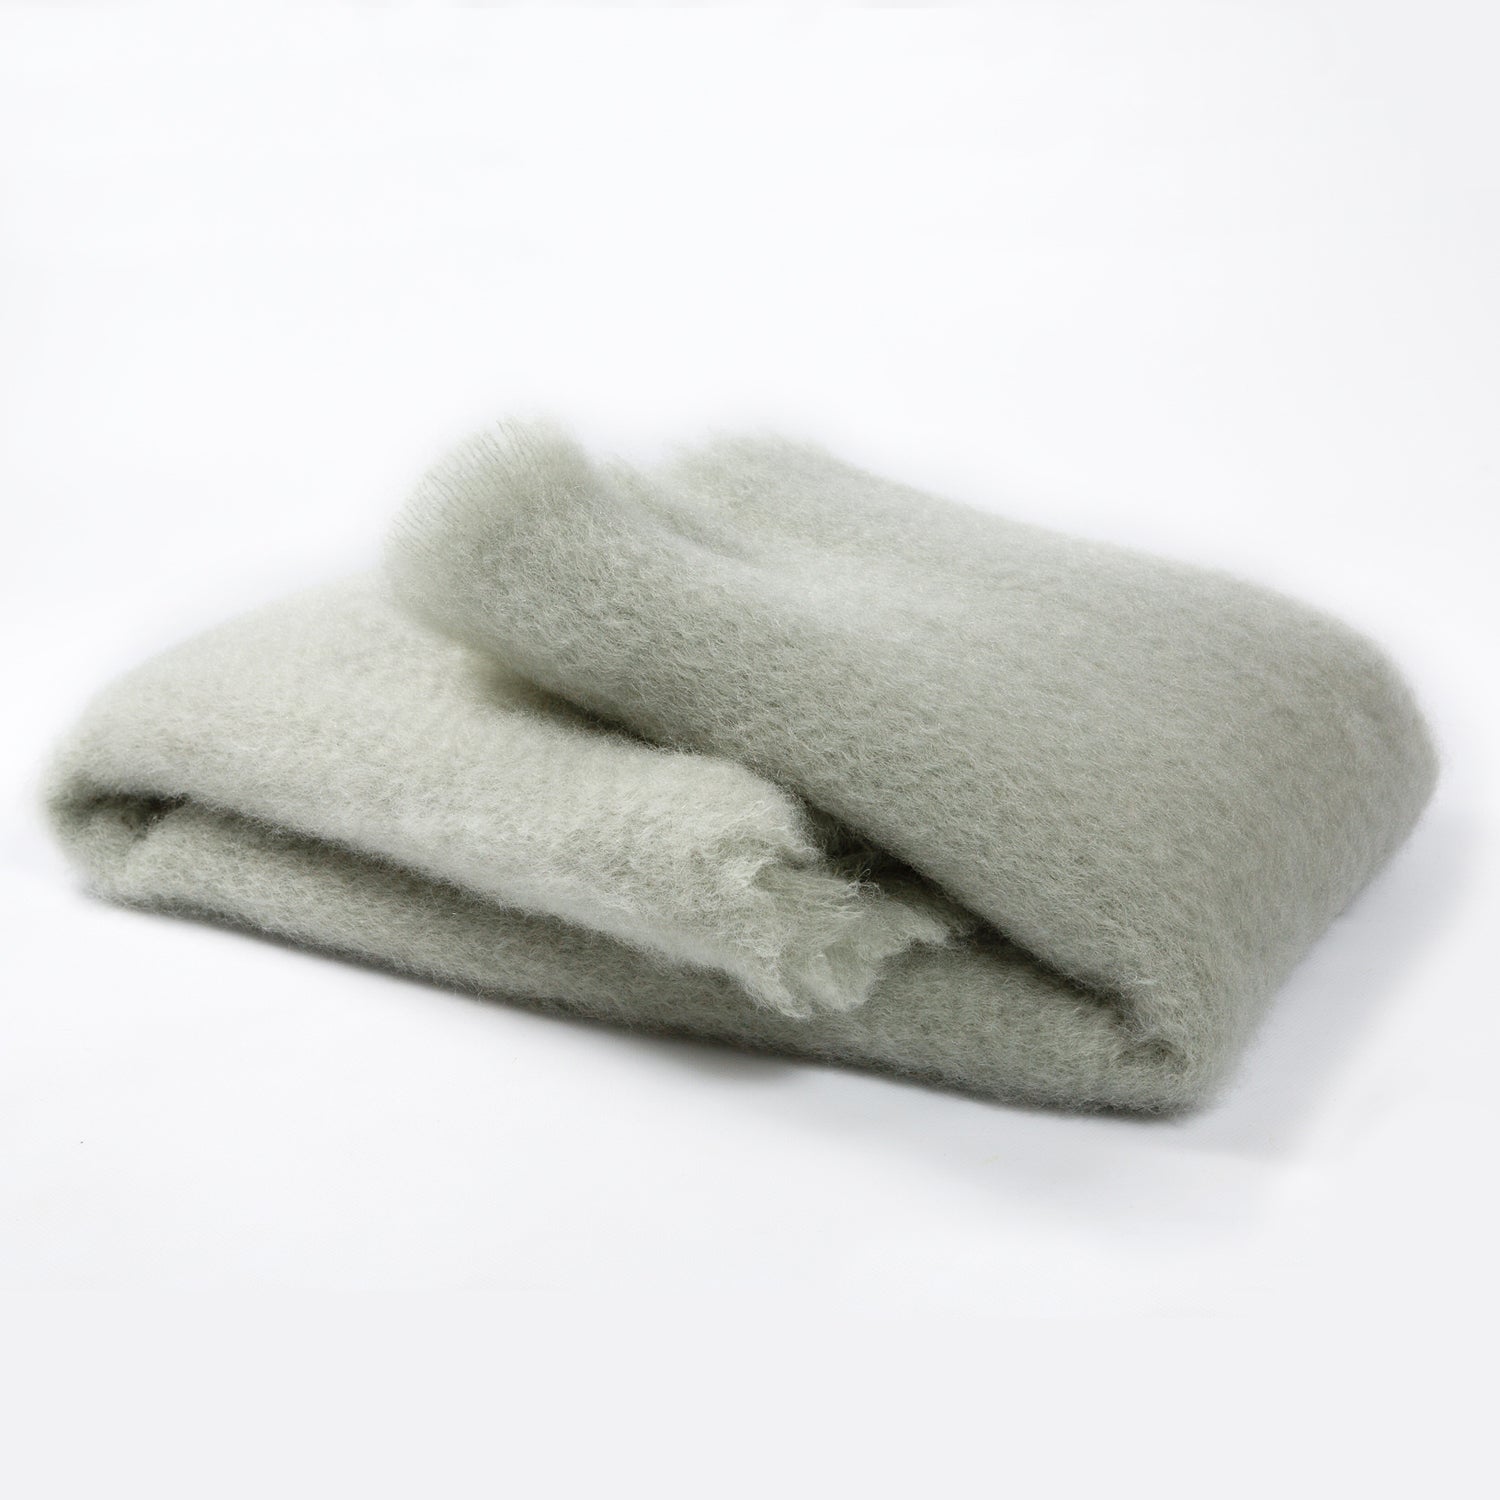 The Lisos Mohair throws from Mantas Ezcaray are distinguished by their exceptional lightness and warmth. The shine and silkiness of the fibers allow for a bright and long-lasting colour. The plush mohair fabric used to make Mantas Ezcaray's signature 'Lisos' throw is regarded as one of the most luxurious natural fibers in the world.